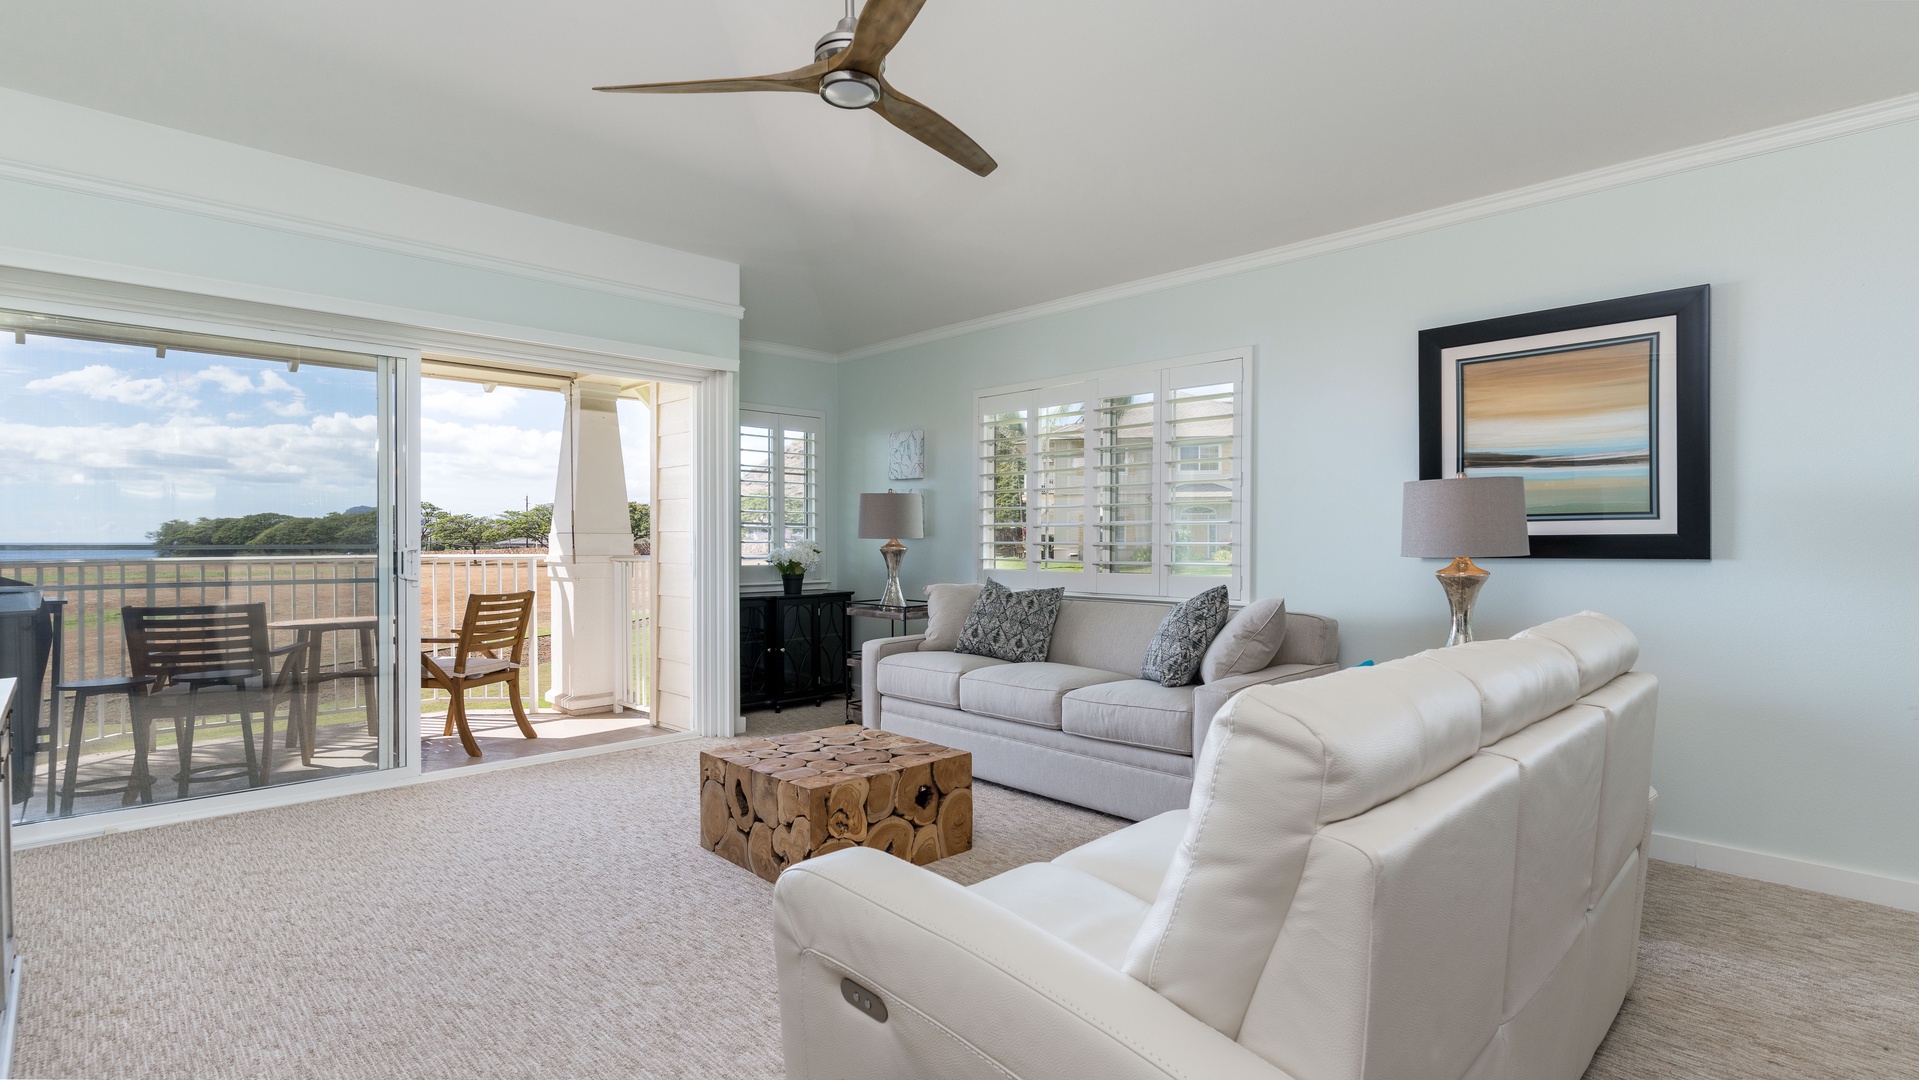 Kapolei Vacation Rentals, Kai Lani 21C - Seamless living in the beautifully furnished living room with a peaceful view.